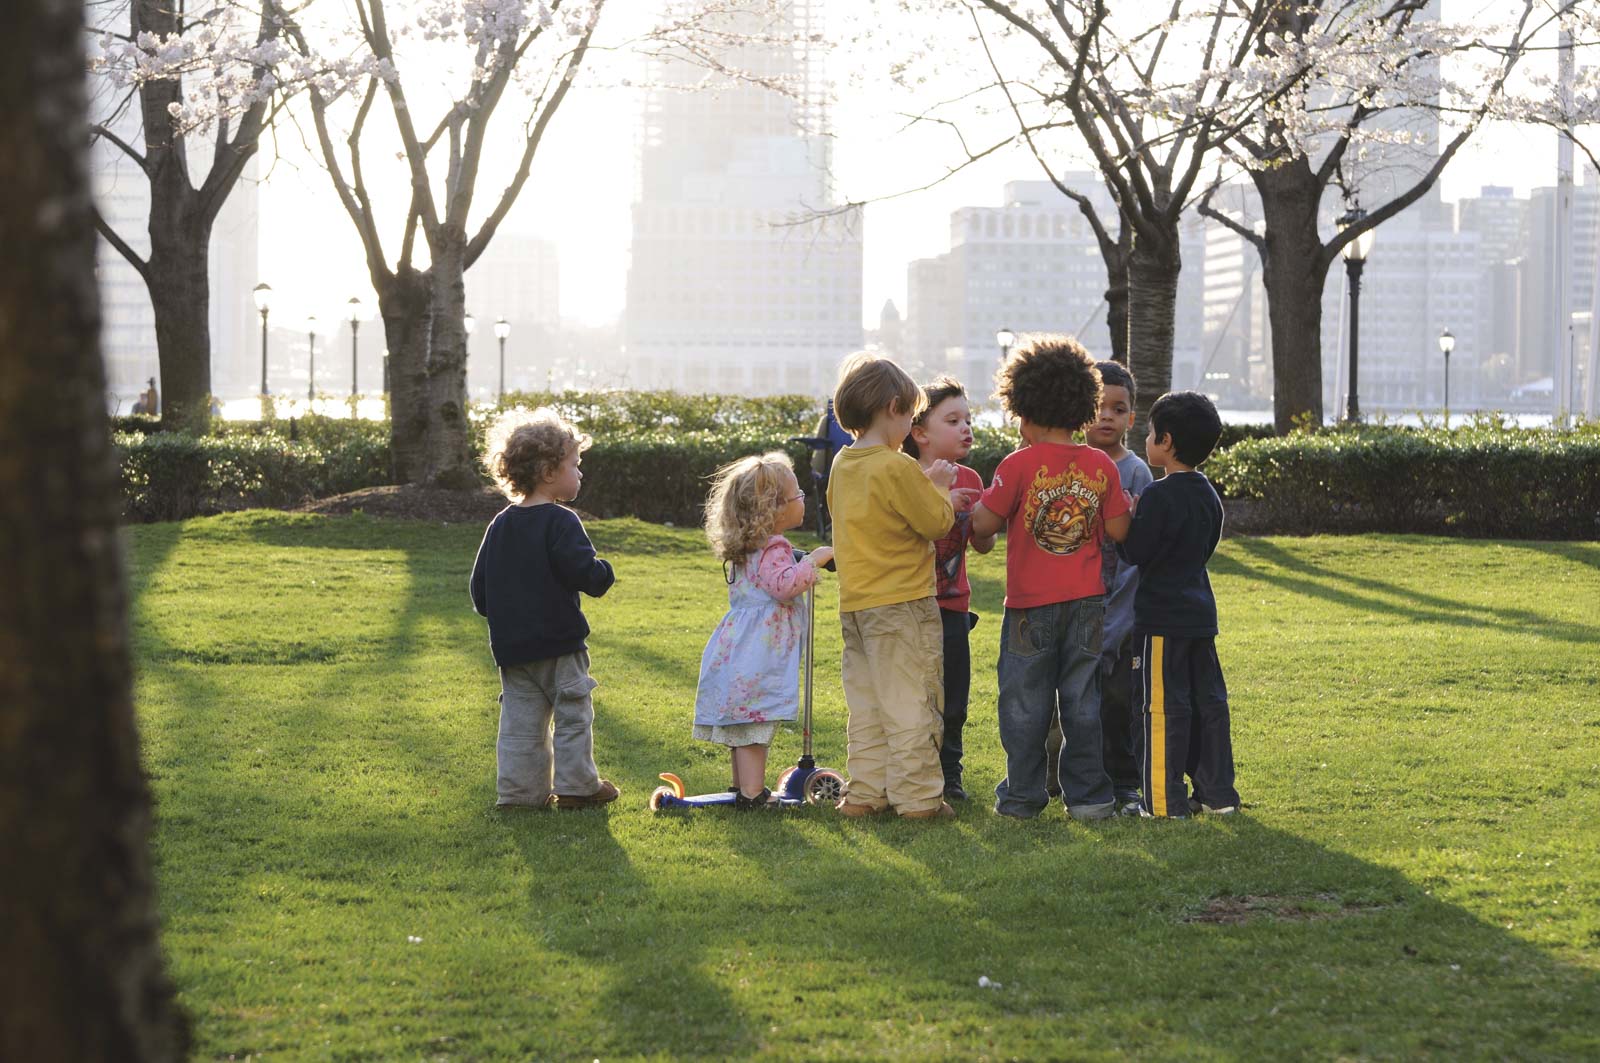 Children at play in Battery Park City, a planned community in Lower Manhattan